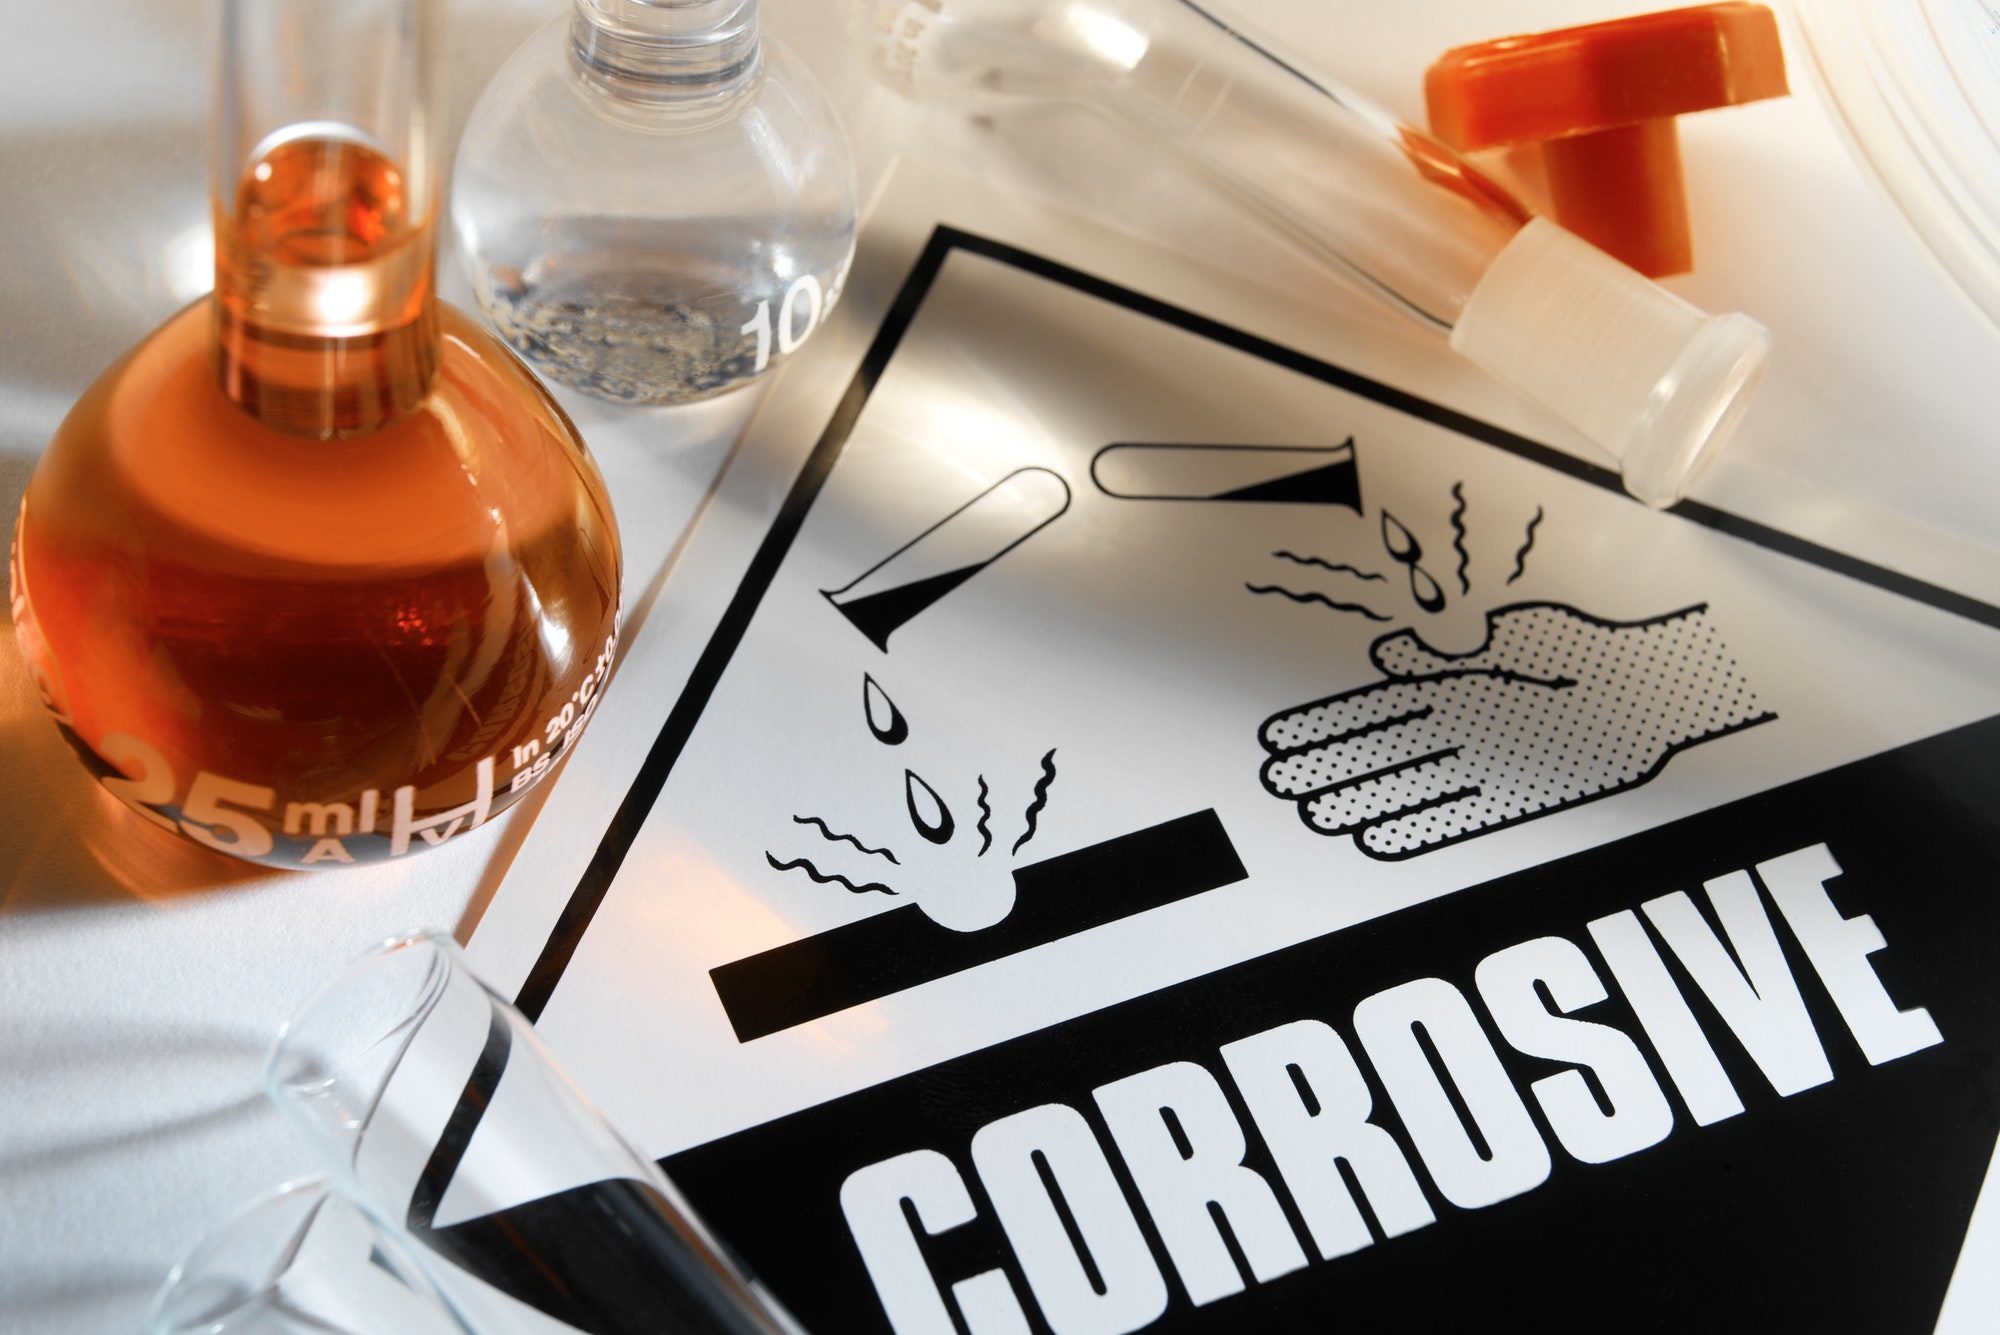 Corrosive Warning Sign - A corrosive substance is one that will damage or destroy other substances